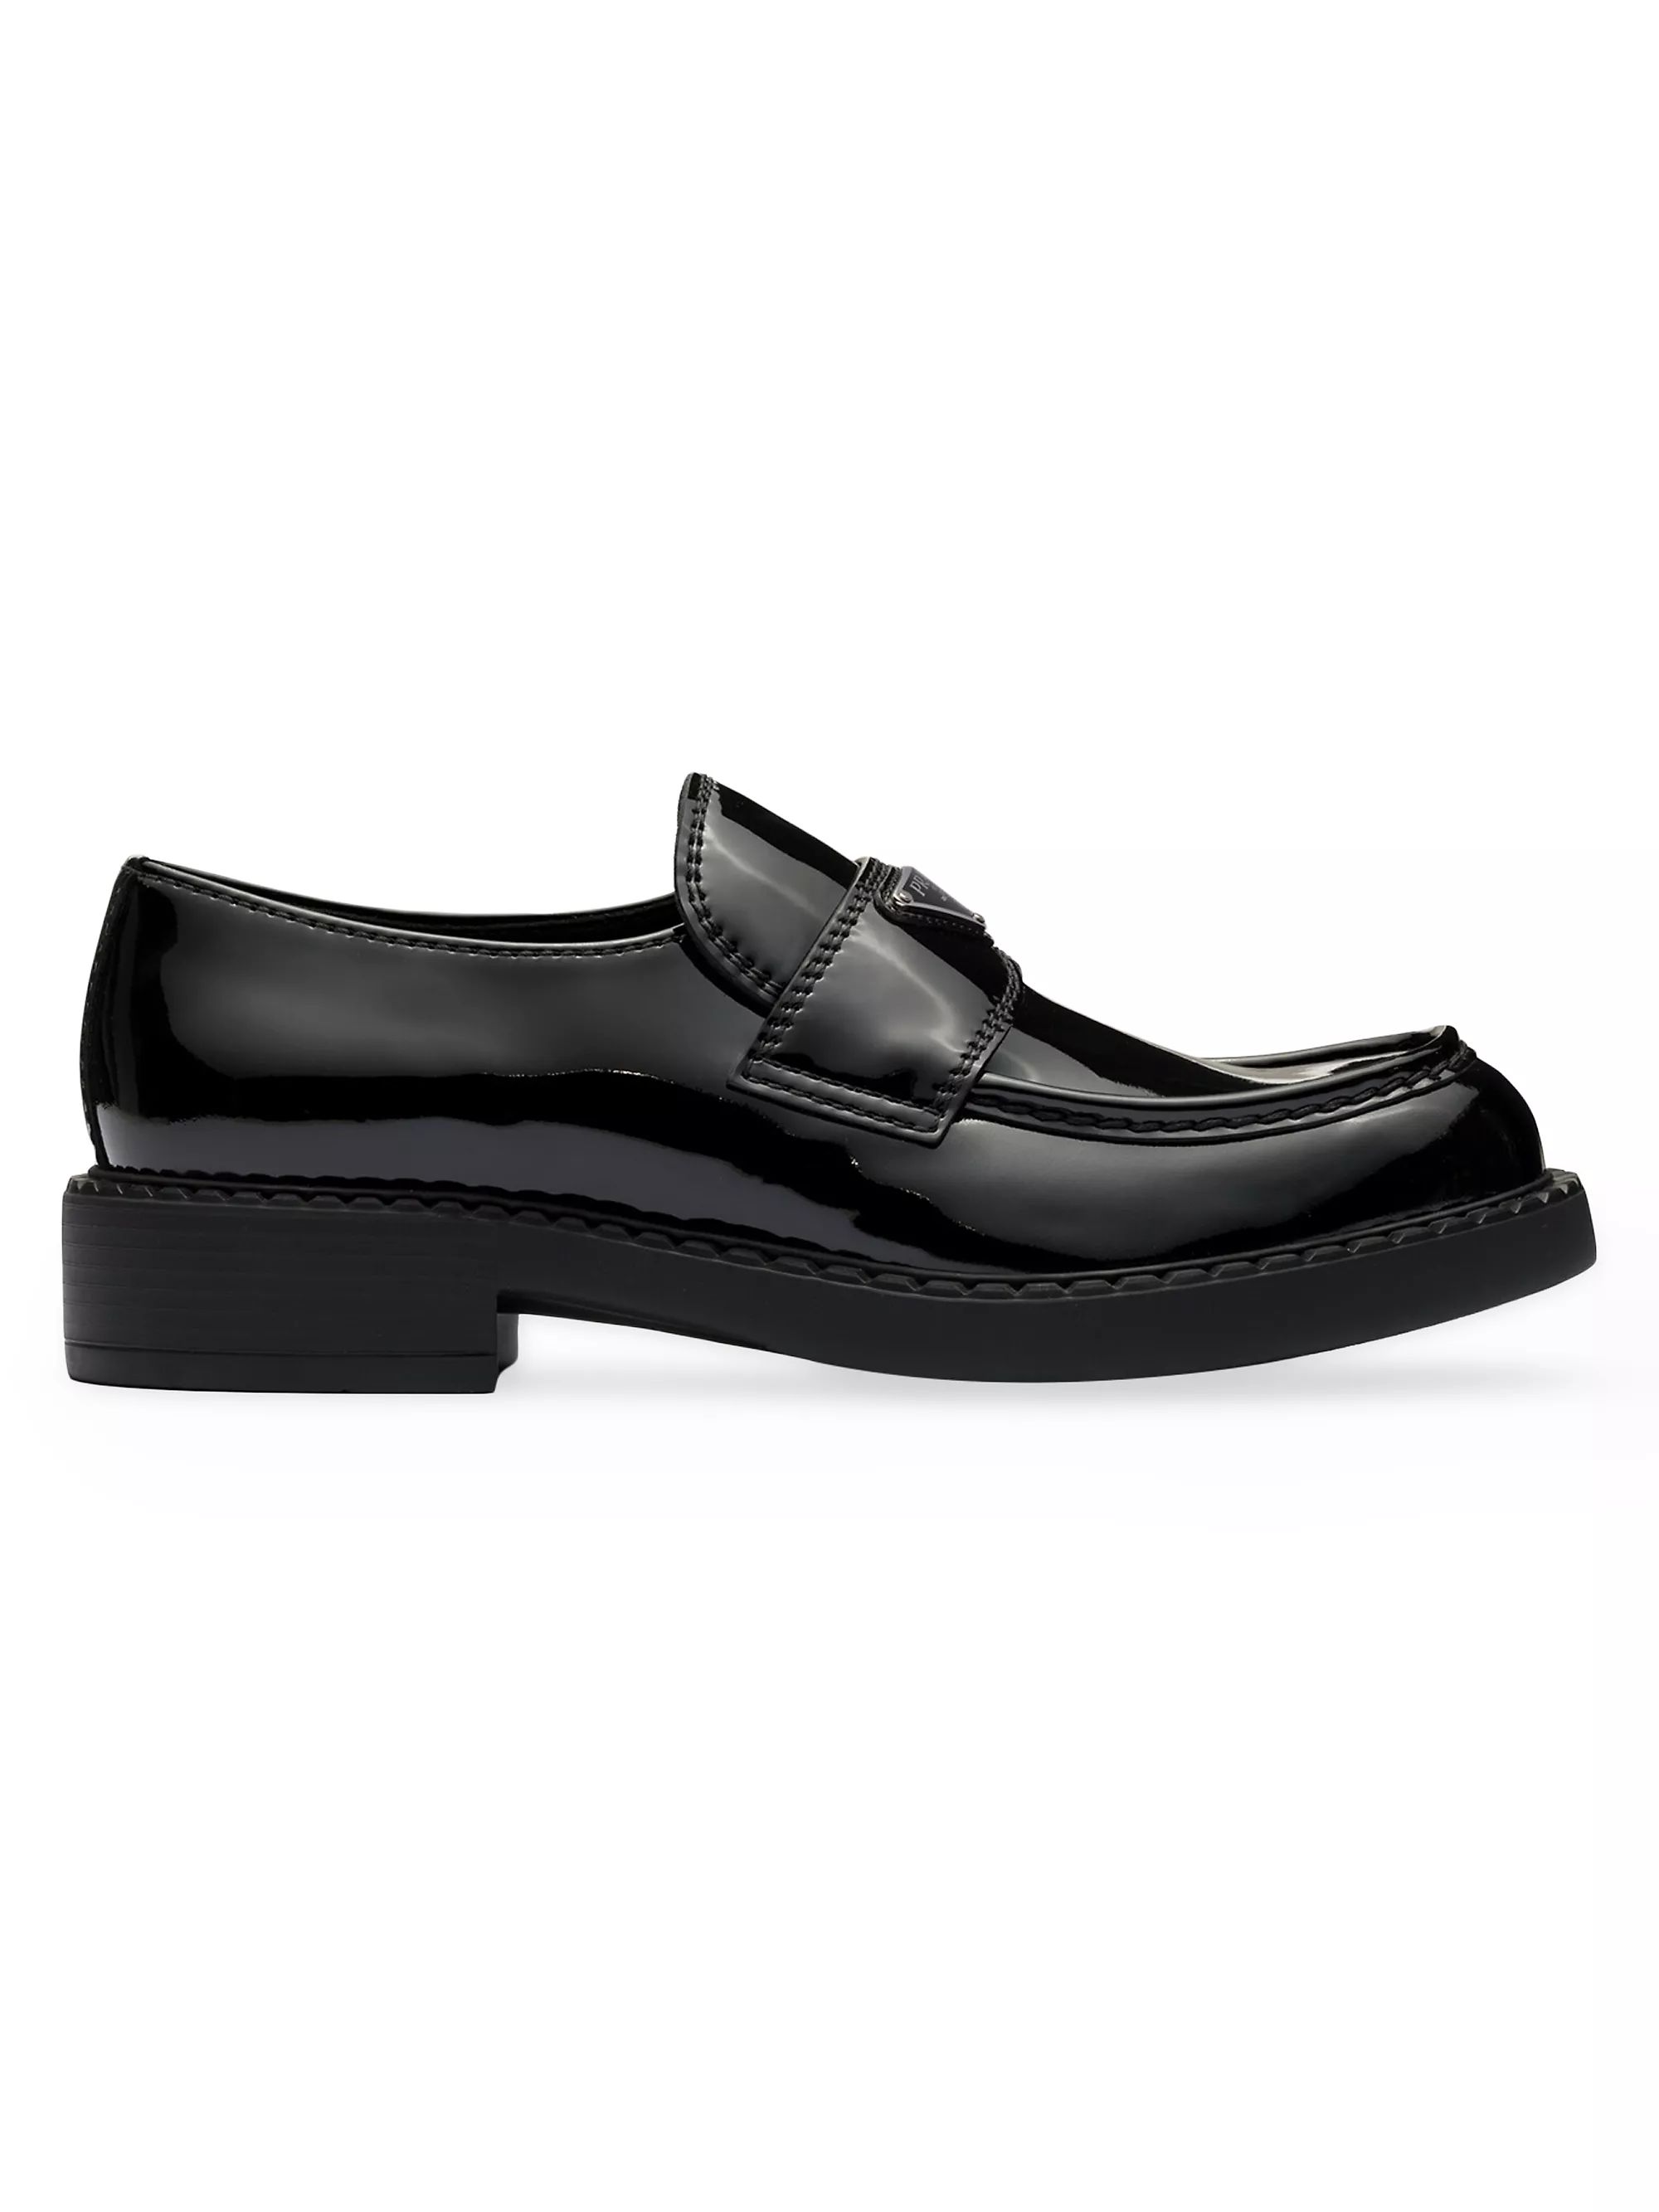 Patent Leather Loafers | Saks Fifth Avenue